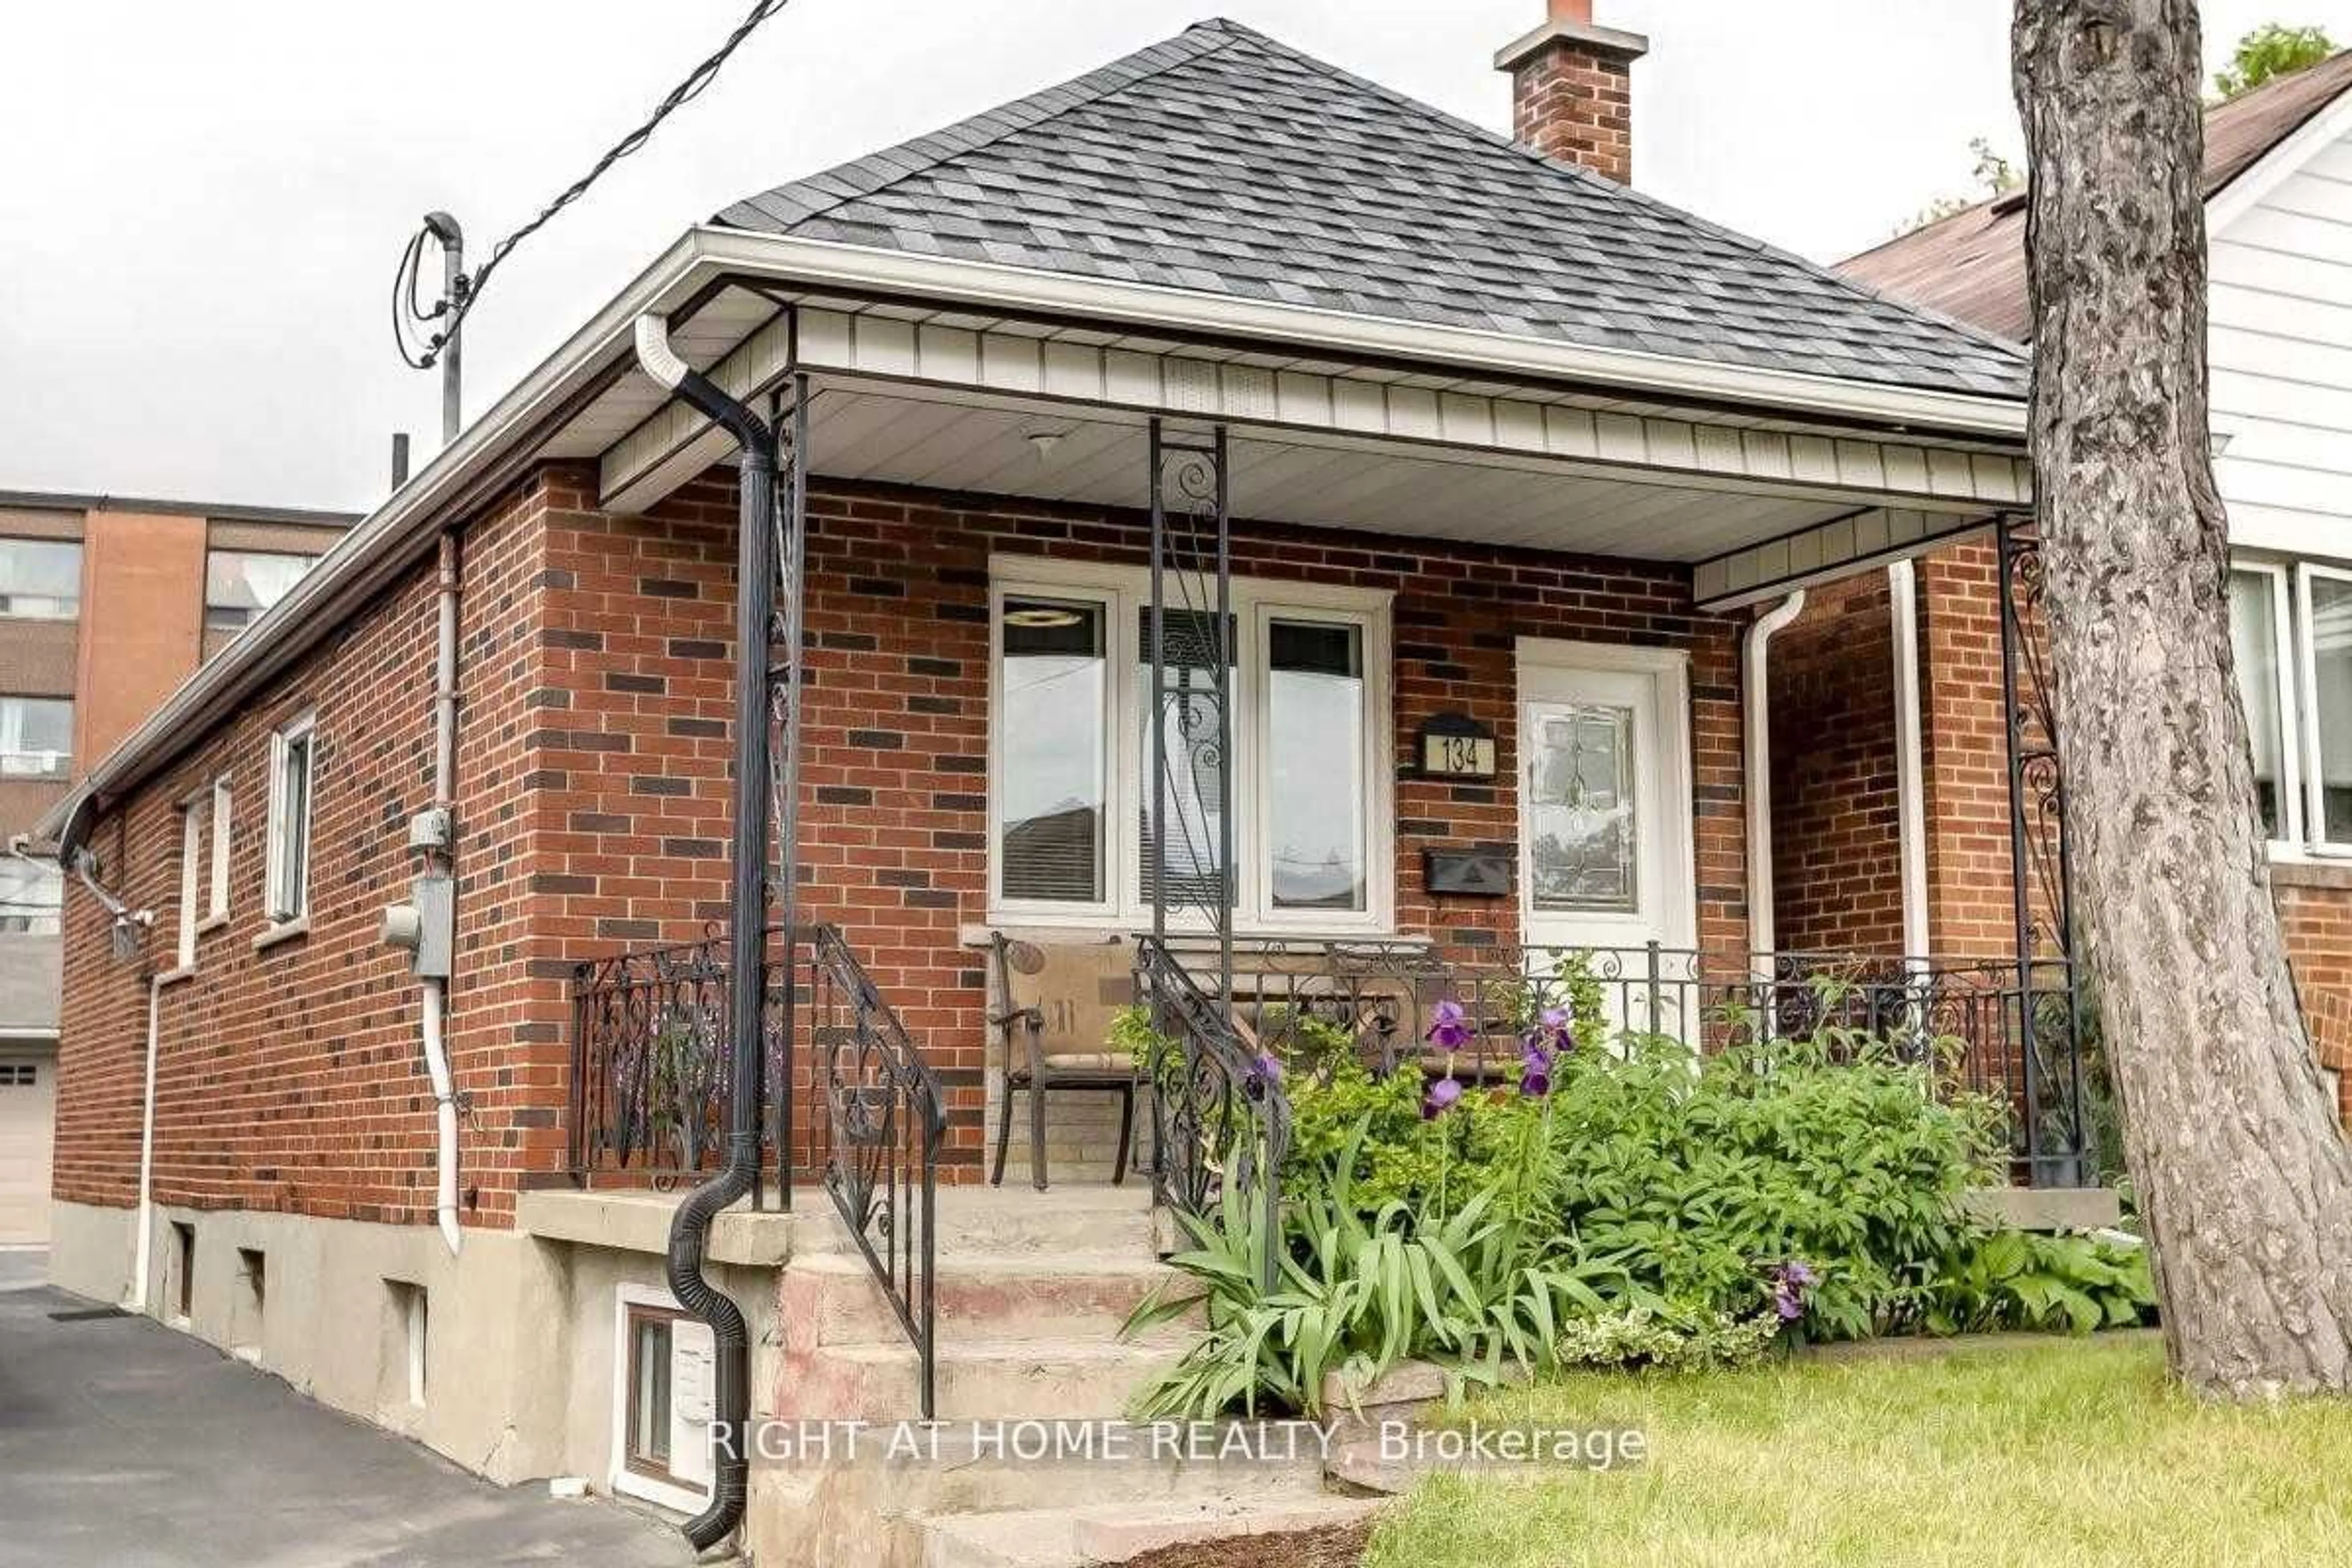 Home with brick exterior material for 134 Locksley Ave, Toronto Ontario M6B 3N5